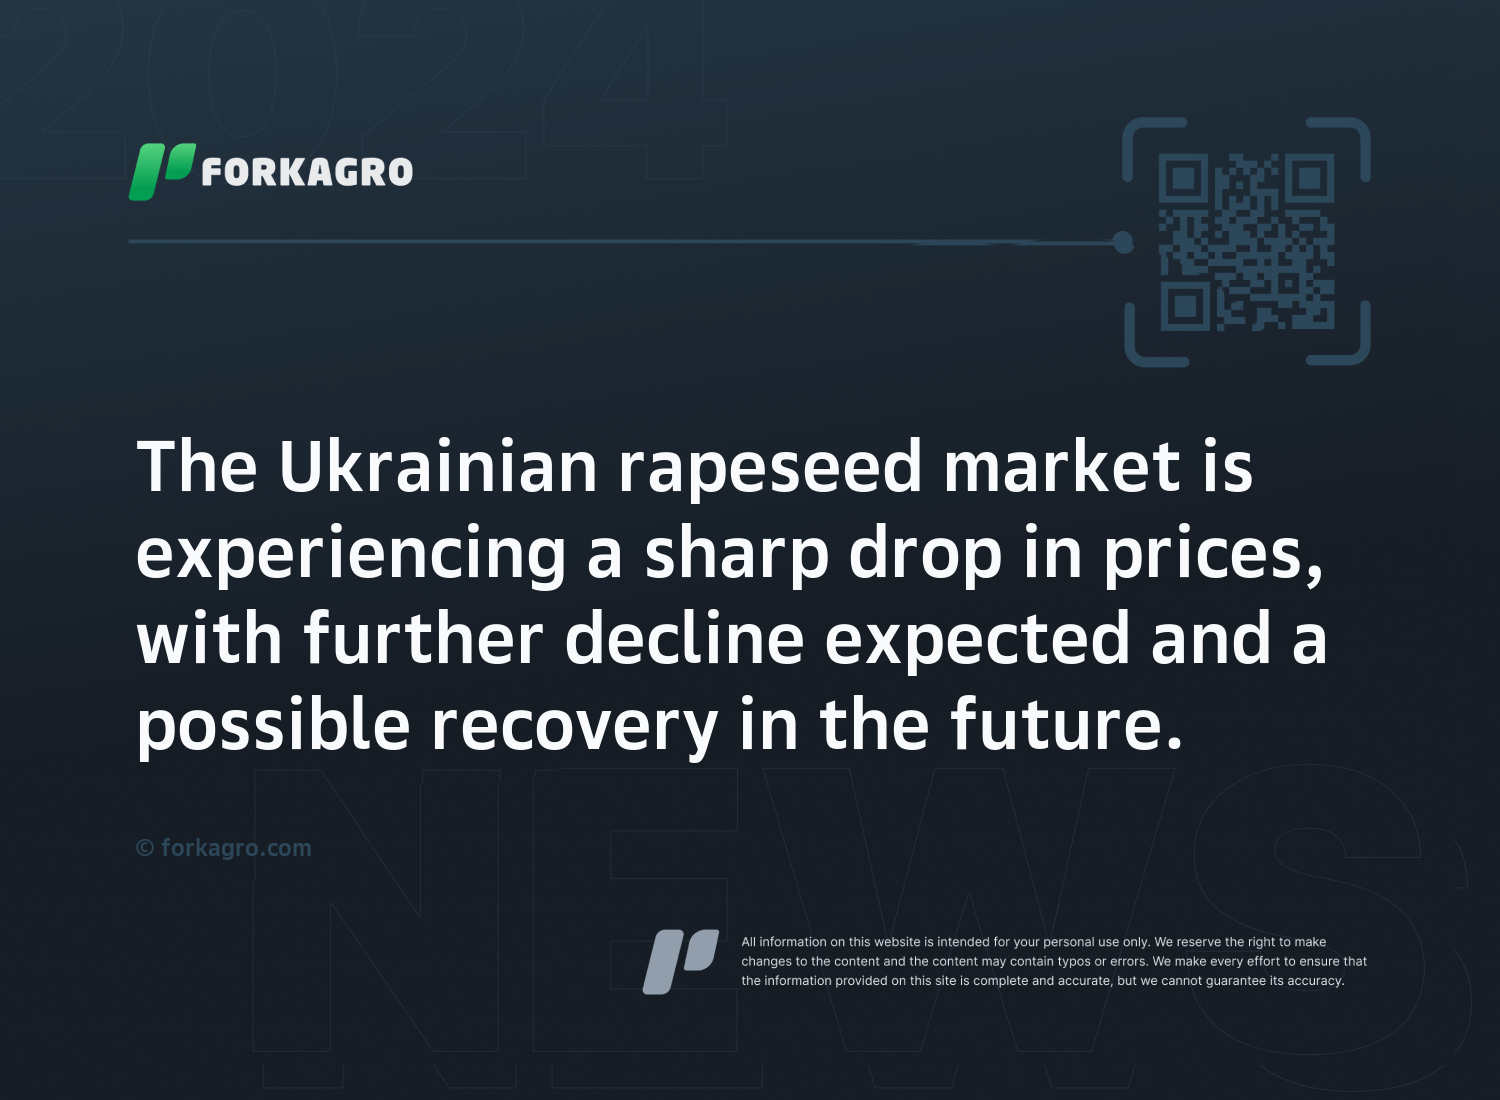 The Ukrainian rapeseed market is experiencing a sharp drop in prices, with further decline expected and a possible recovery in the future.